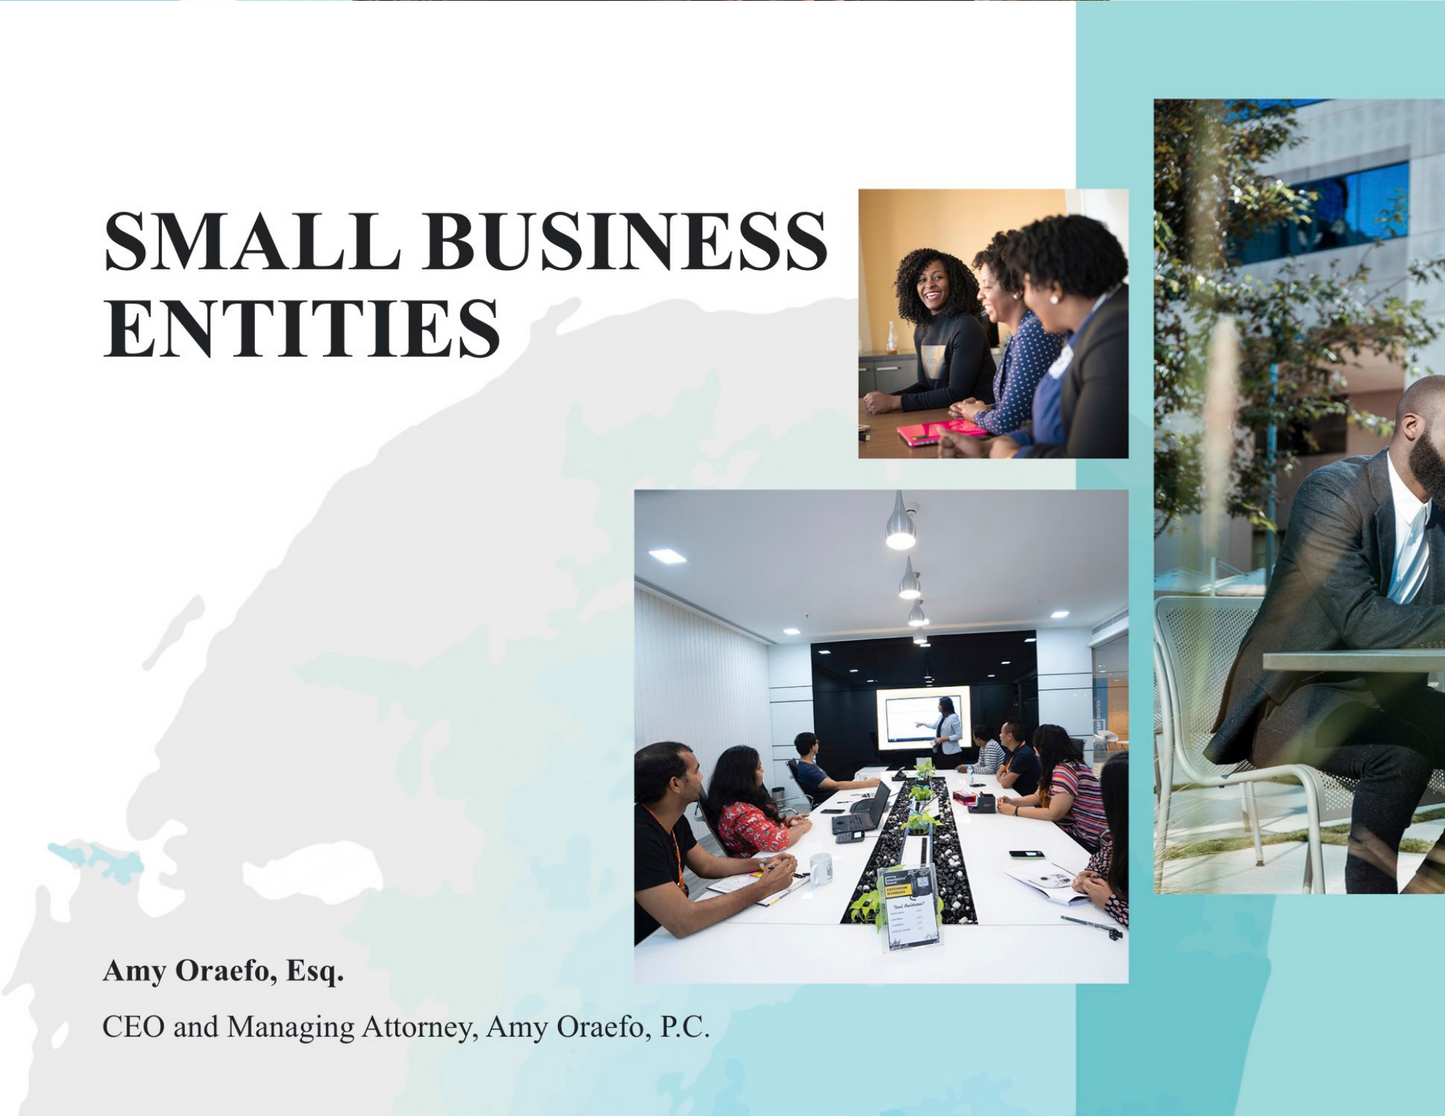 "Small Business Entities" Digital Download